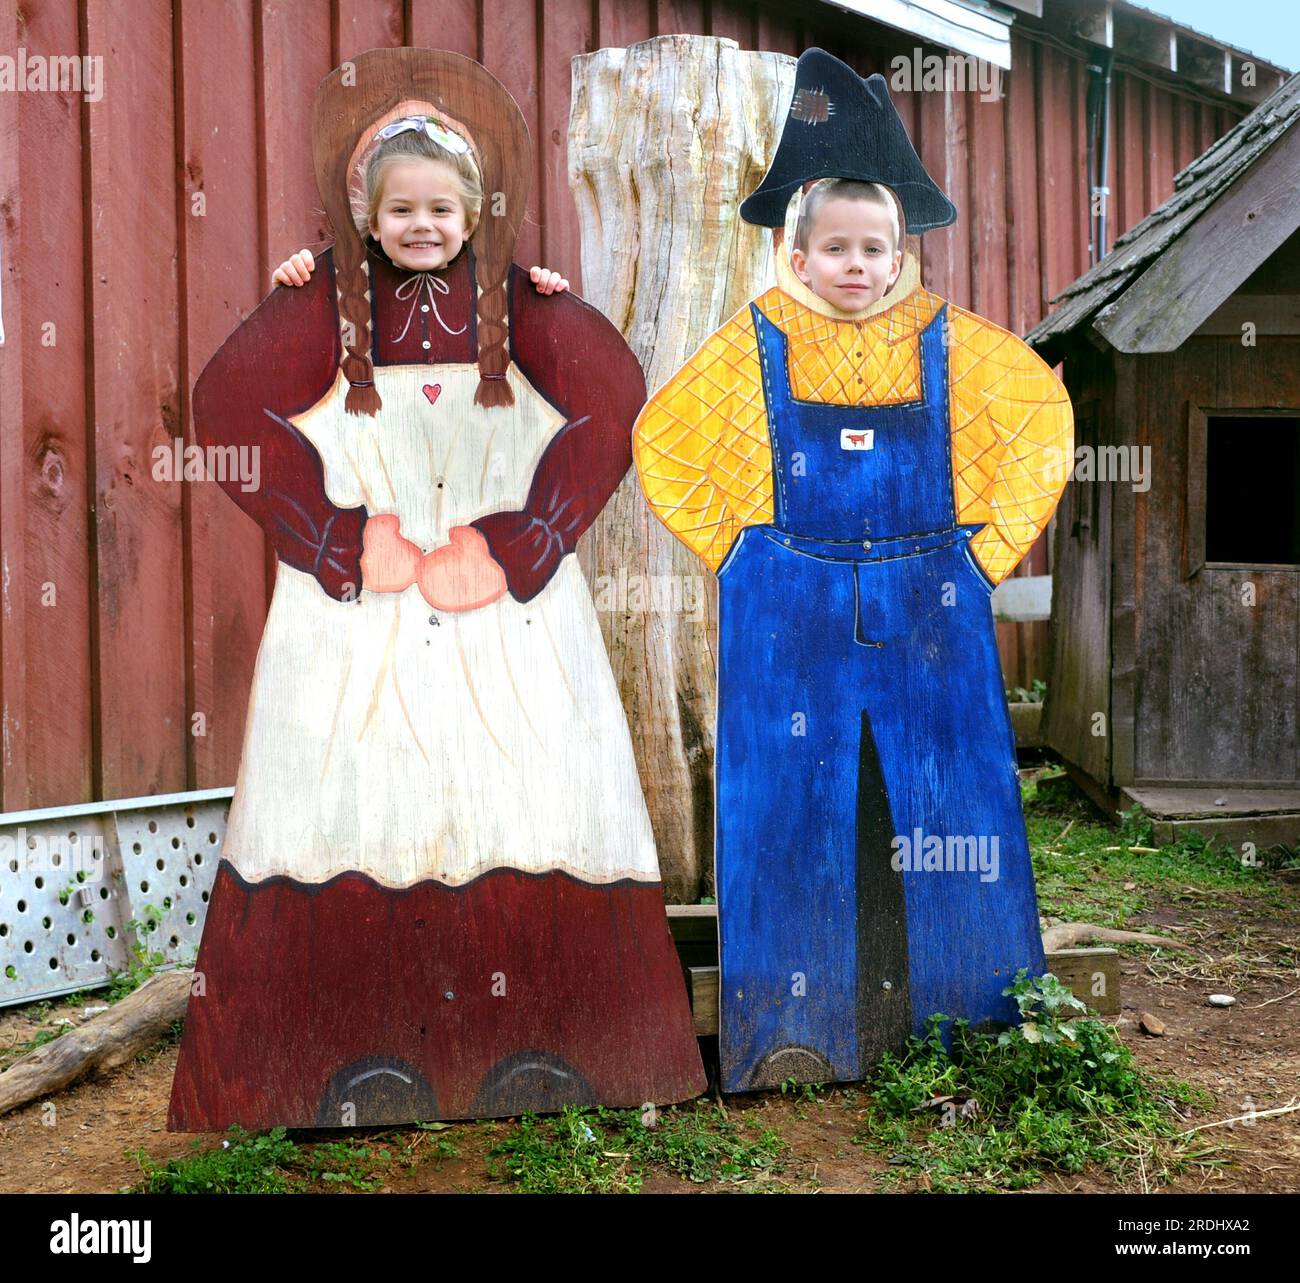 Boy and Girl pretend to be farmers by posing with wooden figures.  They are poking their heads through face holes and smiling.  Both are enjoying harv Stock Photo